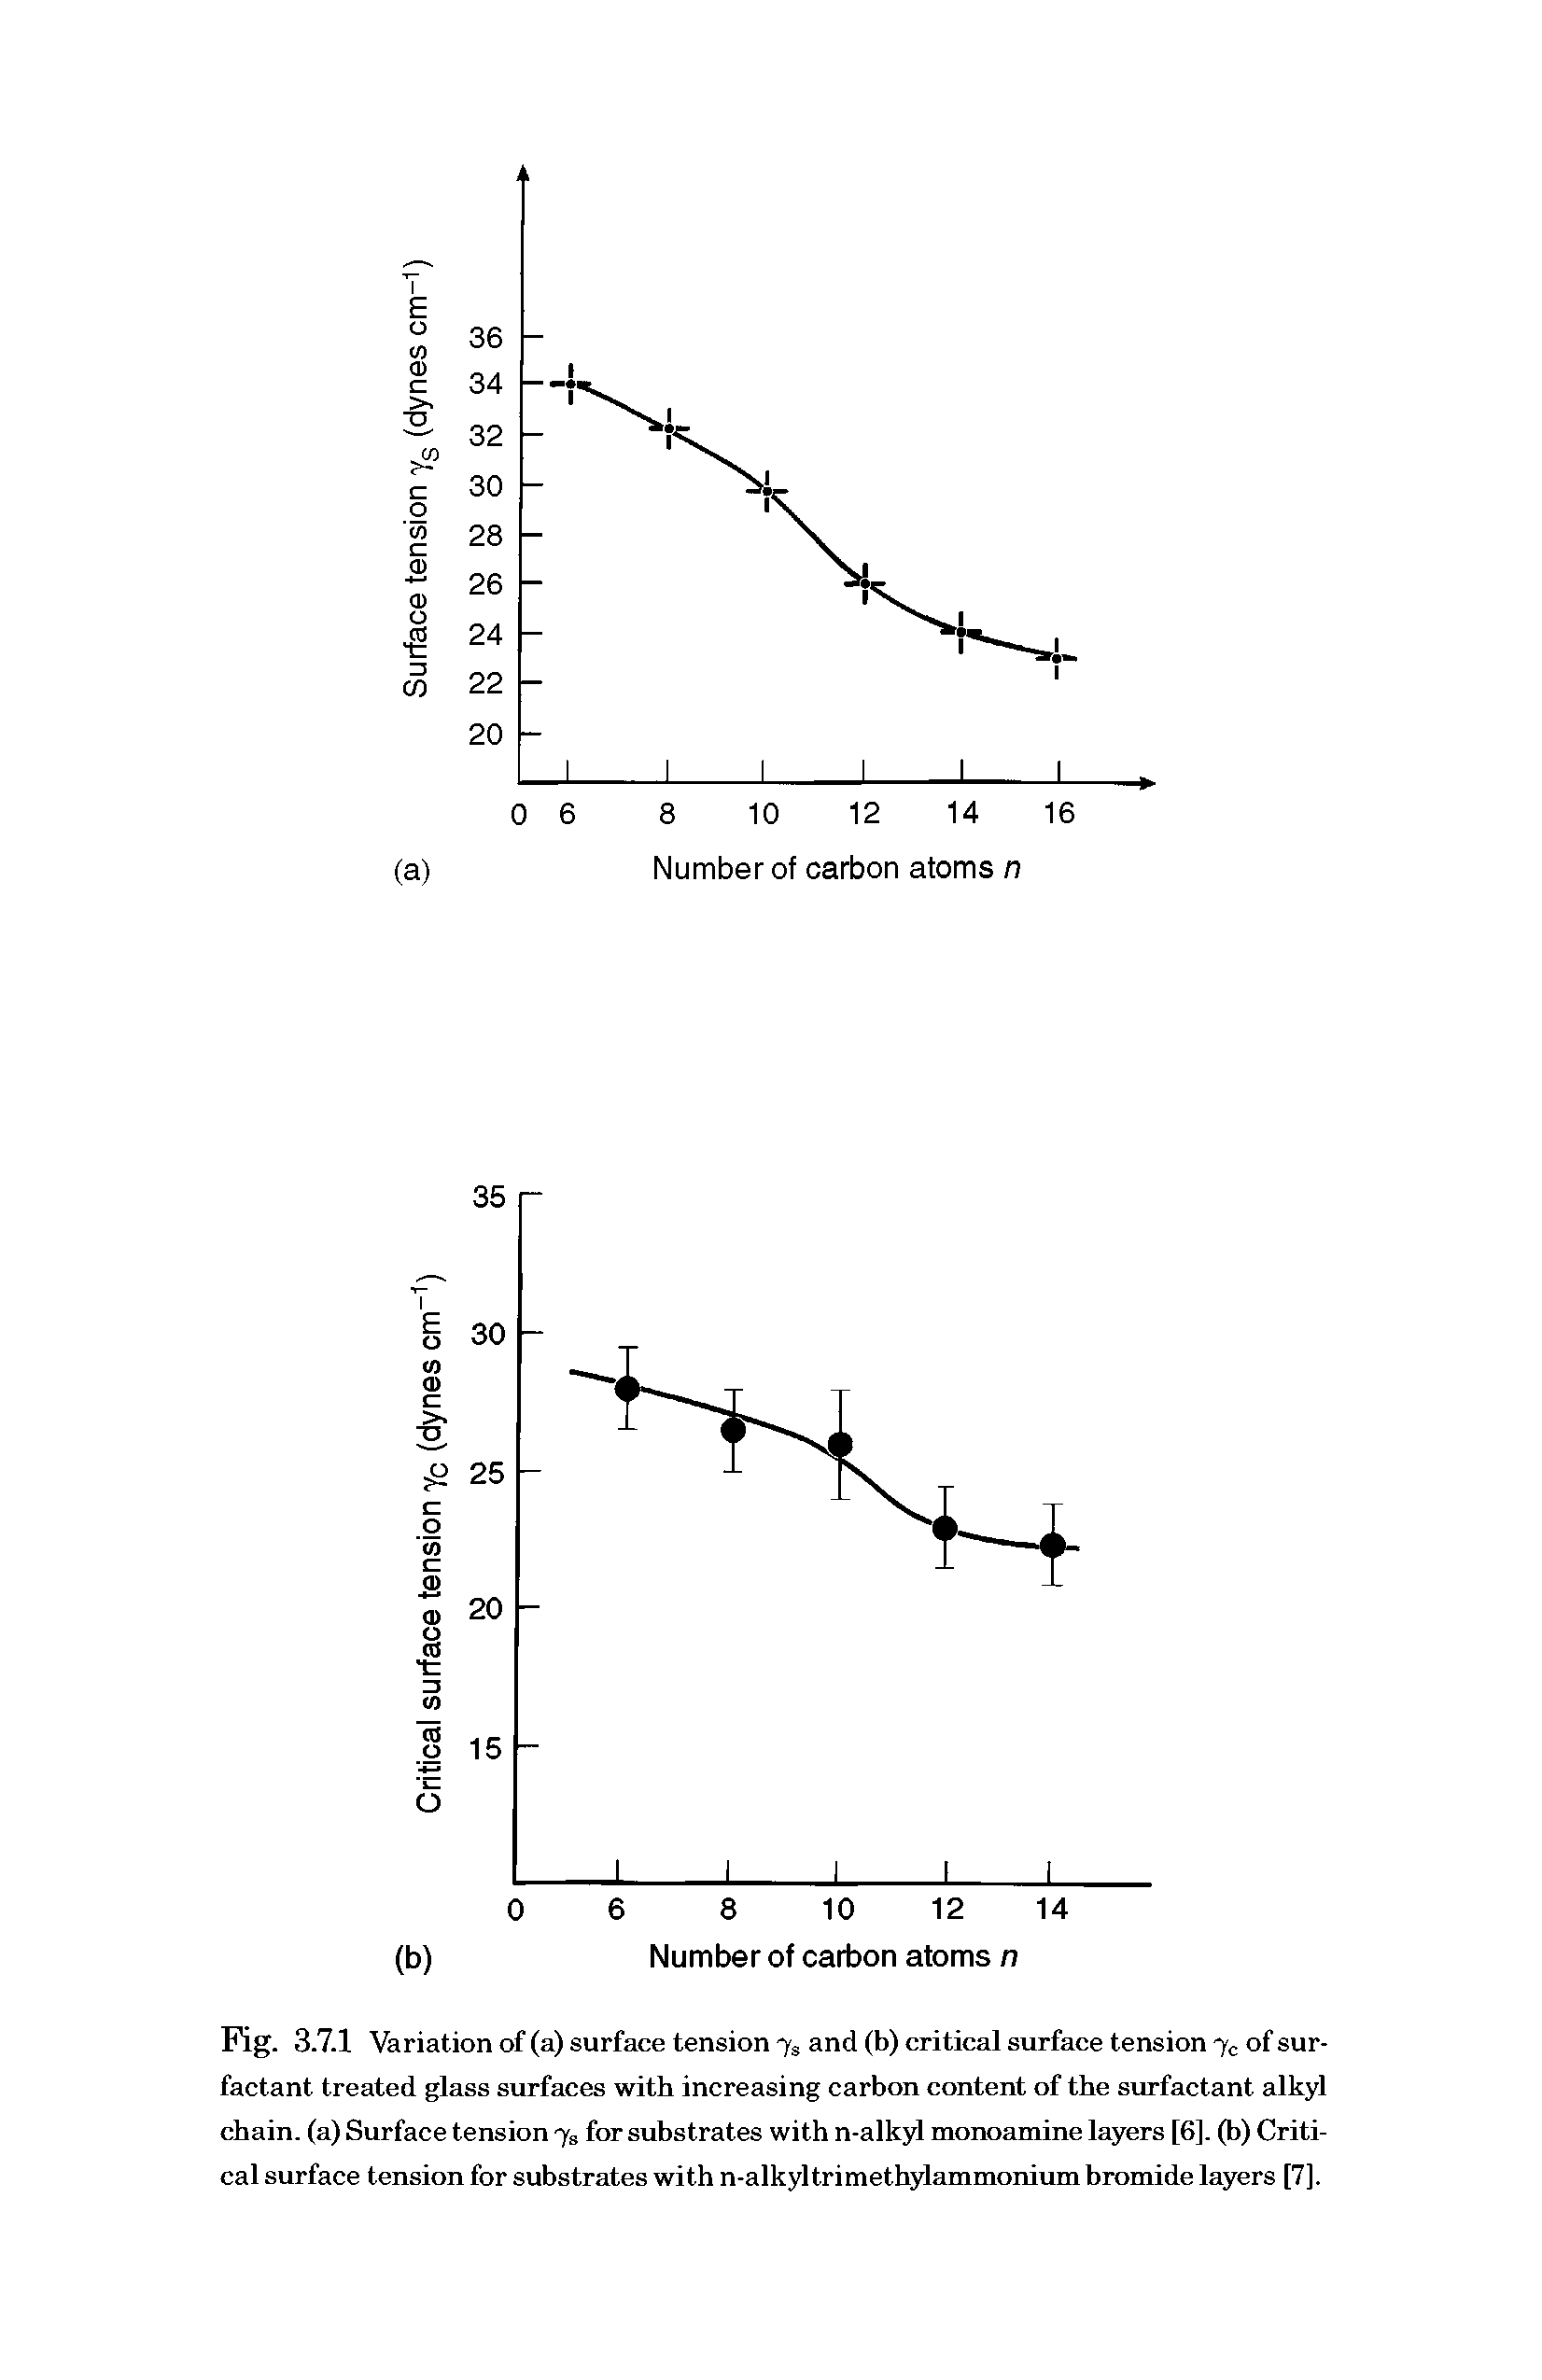 Fig. 3.7.1 Variation of (a) surface tension % and (b) critical surface tension 7c of surfactant treated glass surfaces with increasing carbon content of the surfactant alkyl chain, (a) Surface tension Jb for substrates with n-alkyl monoamine layers [6]. (b) Critical surface tension for substrates with n-alkyltrimethylammonium bromide layers [7].